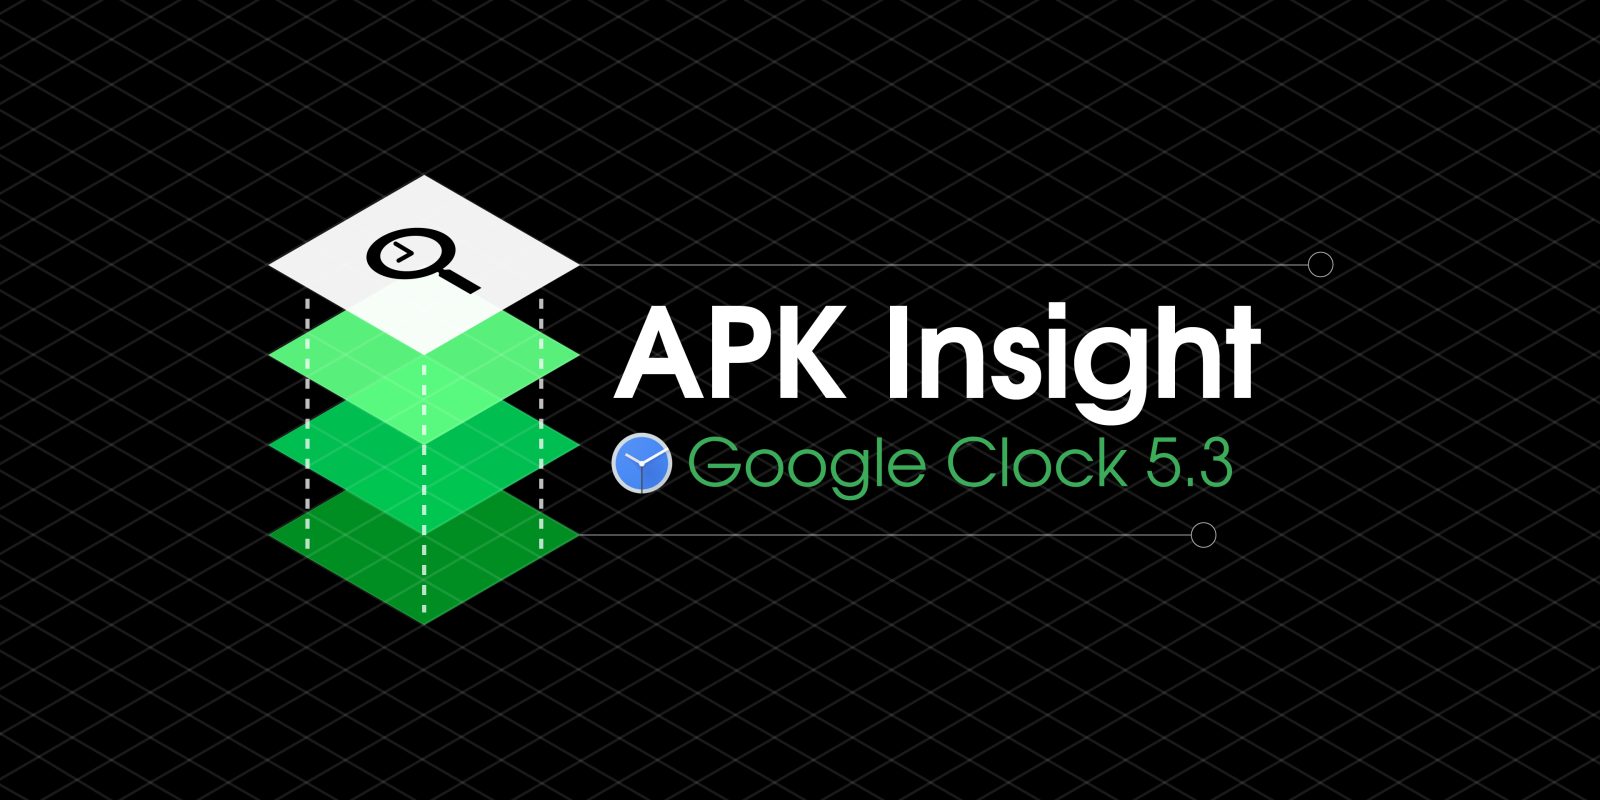 Google Clock 5.3 adds Spotify integration, Android P support, visual tweaks [APK Insight]